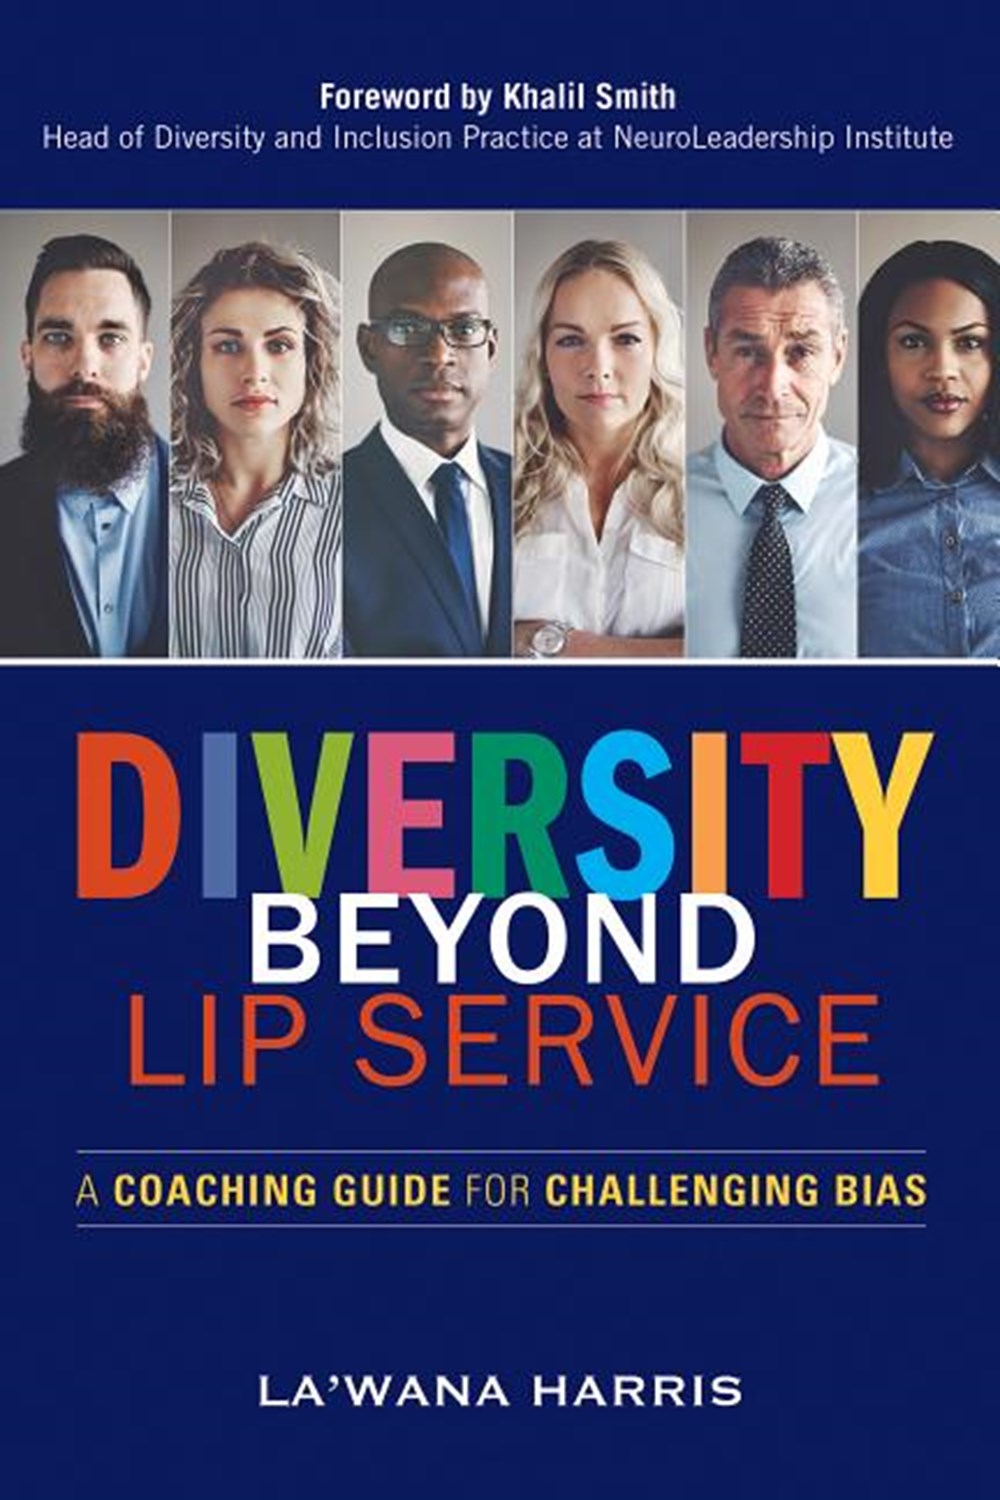 Diversity Beyond Lip Service: A Coaching Guide for Challenging Bias